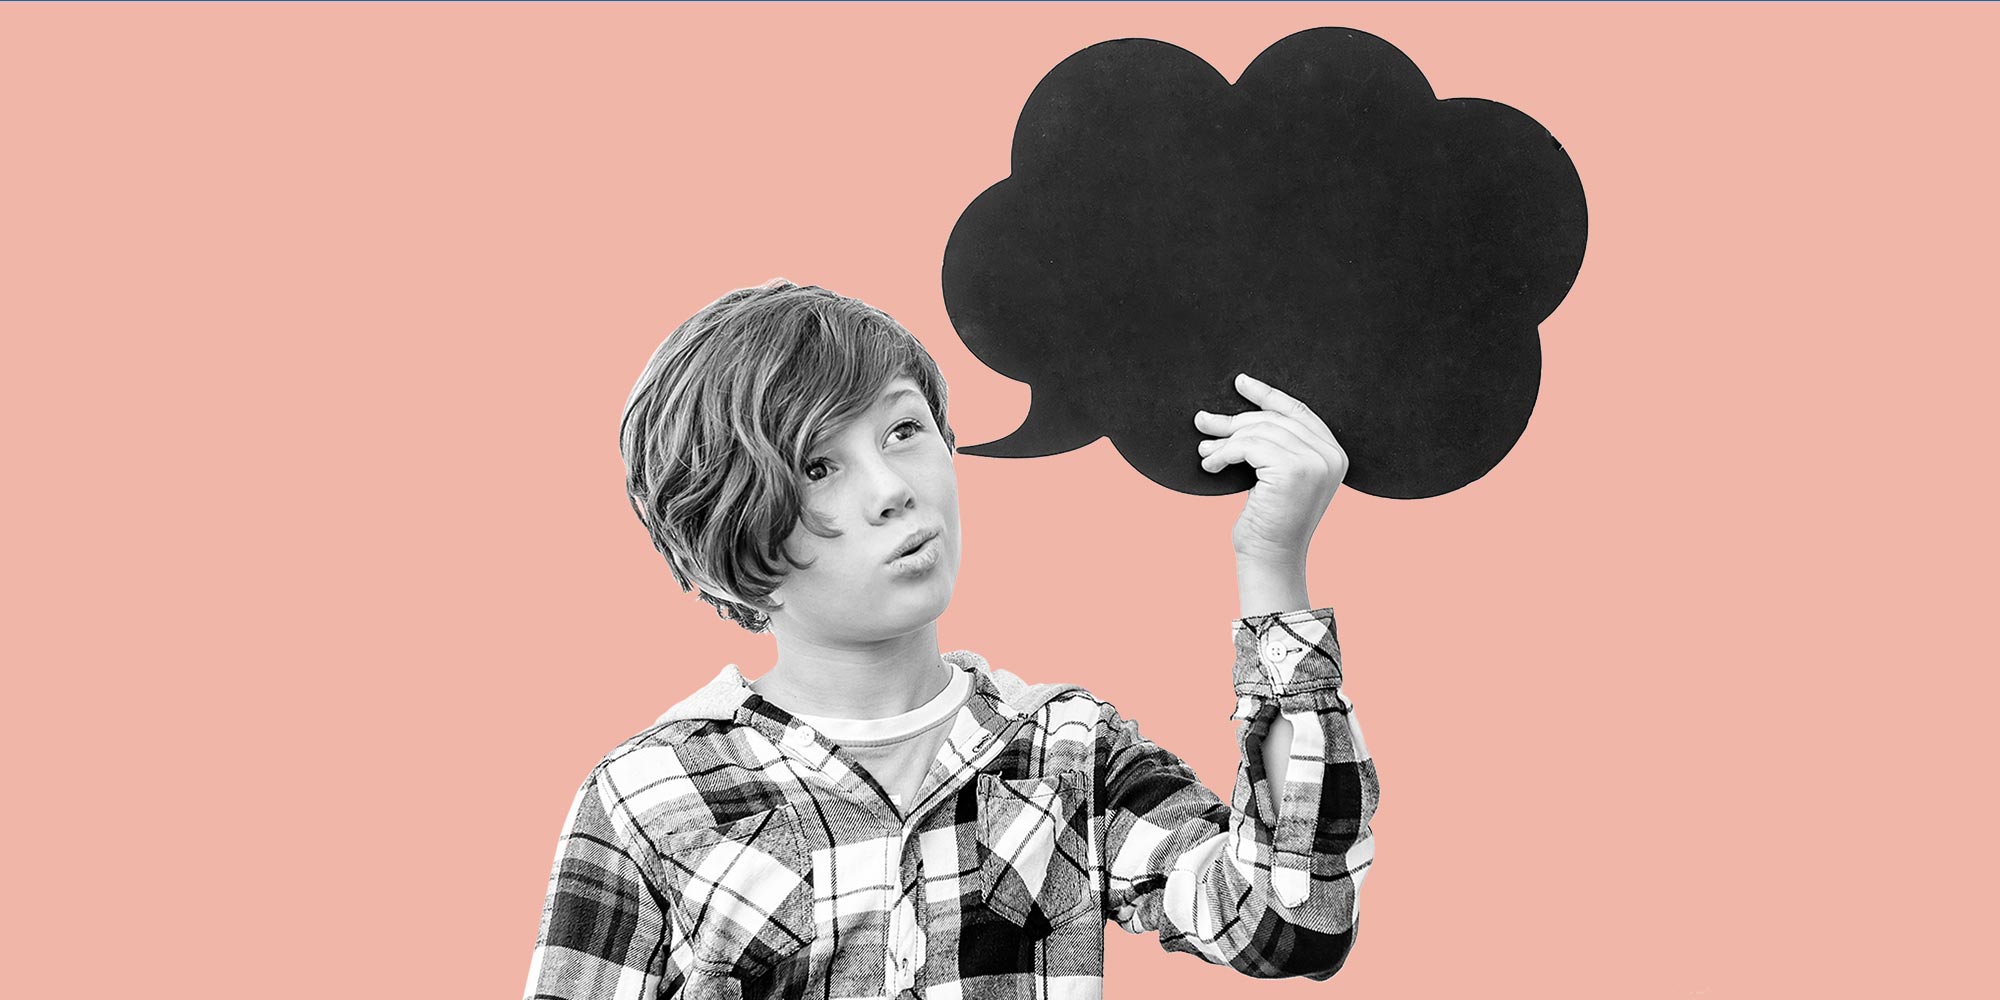 Young person holding a speech bubble. Connecting with your inner adolescent